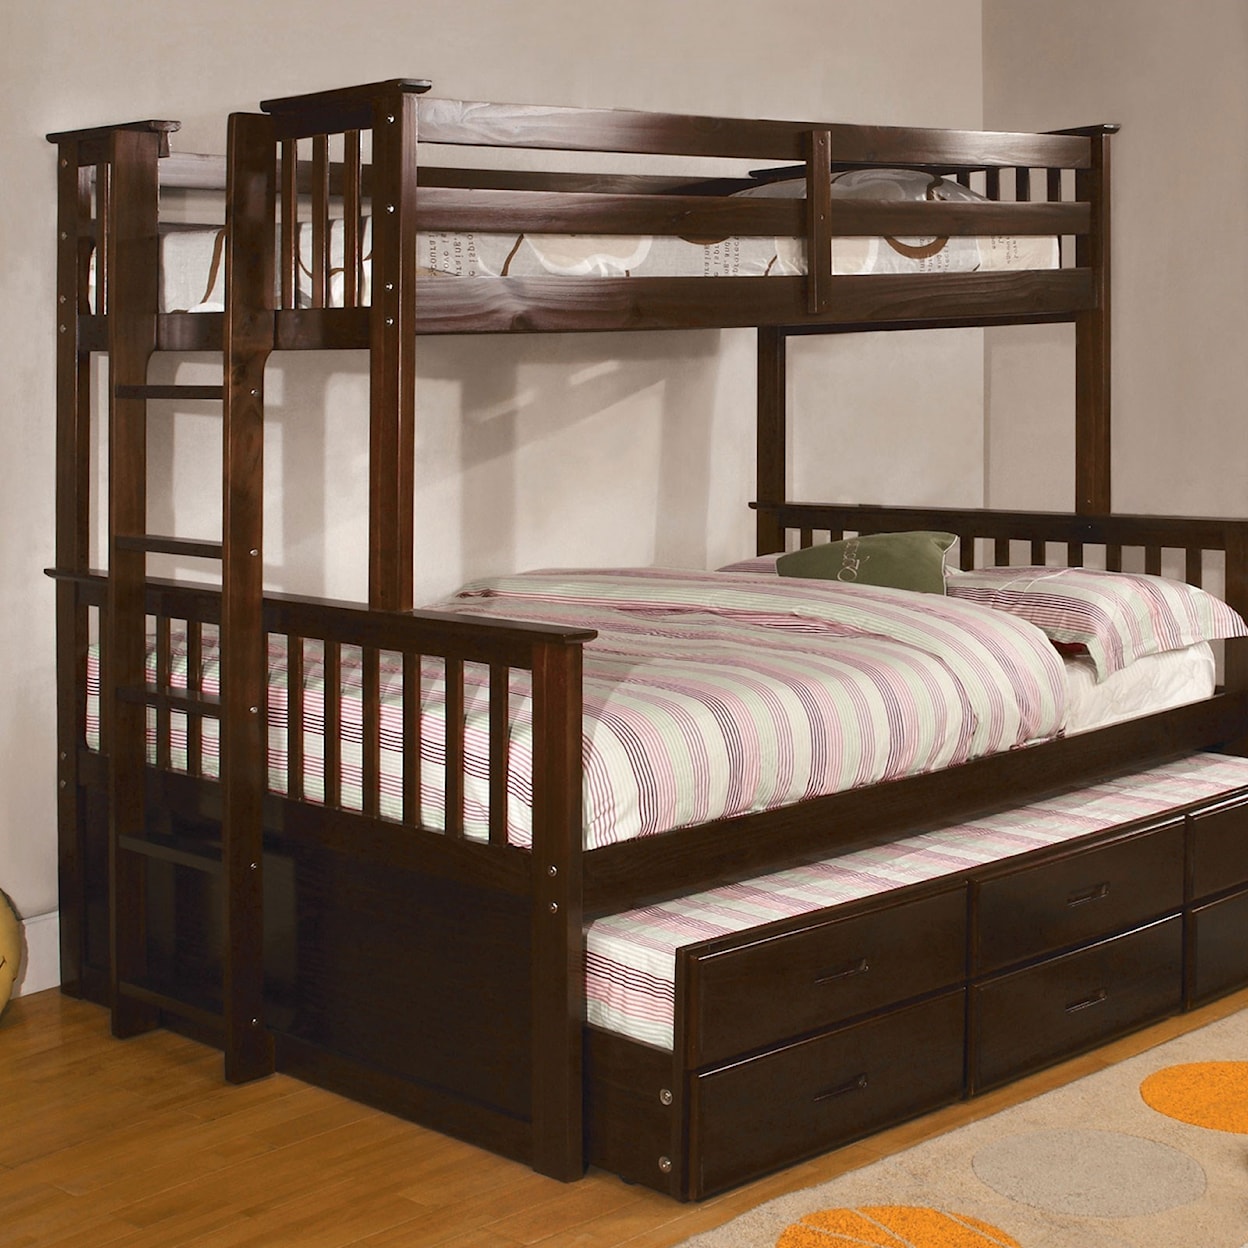 Furniture of America University Twin-over-Full Bunk Bed and Trundle